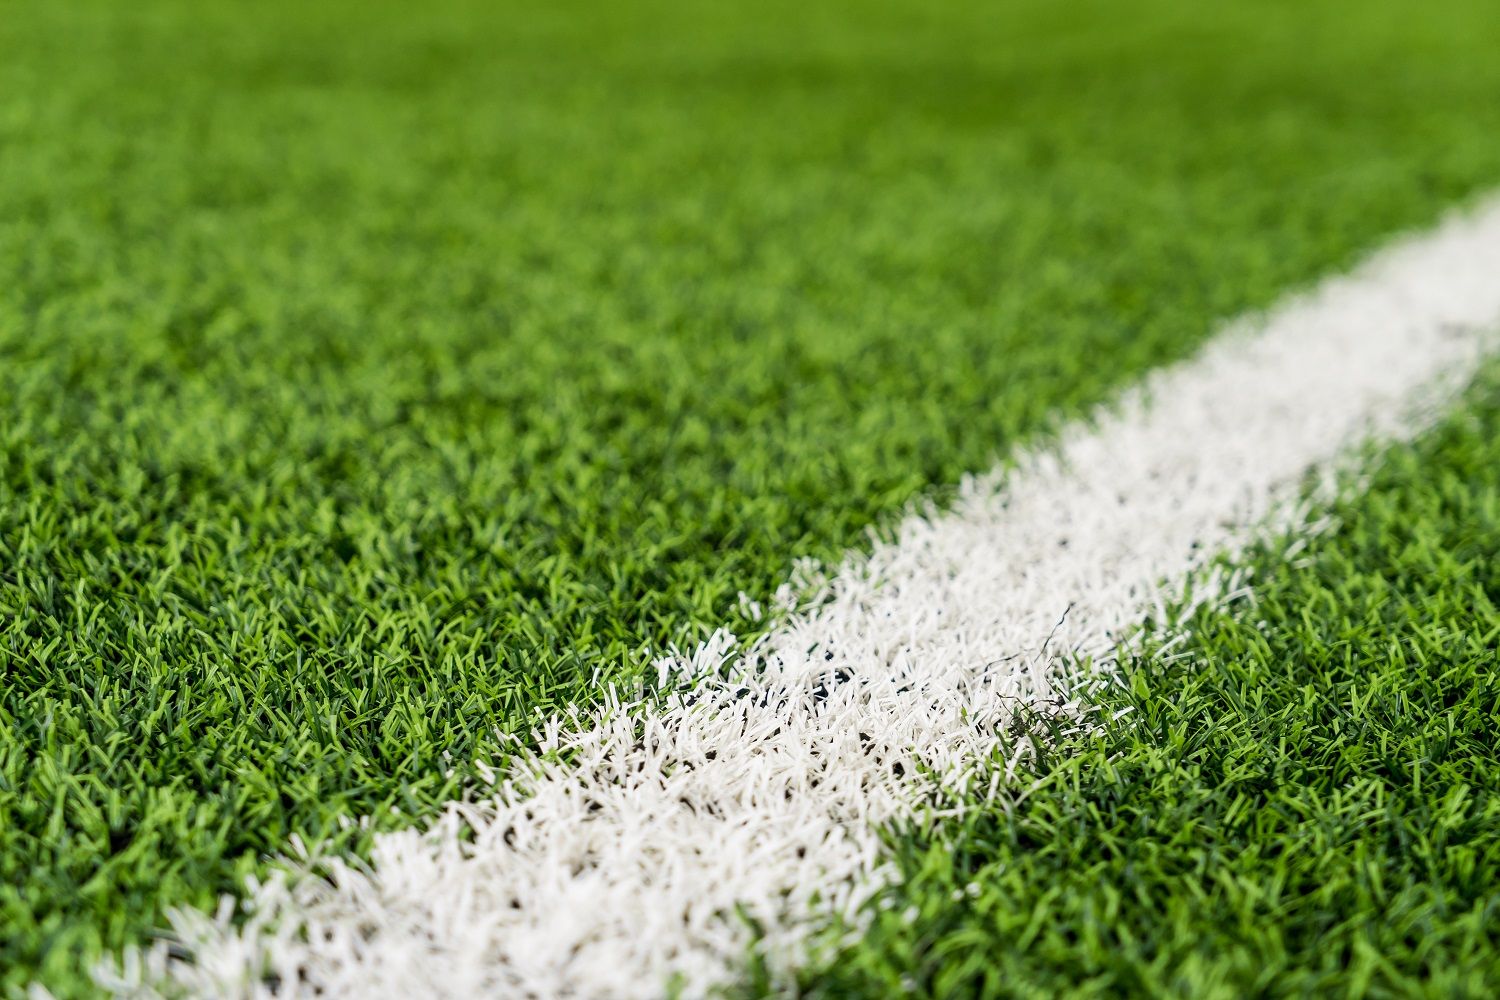 5 Things You Should Know Before Investing in Sports Fields